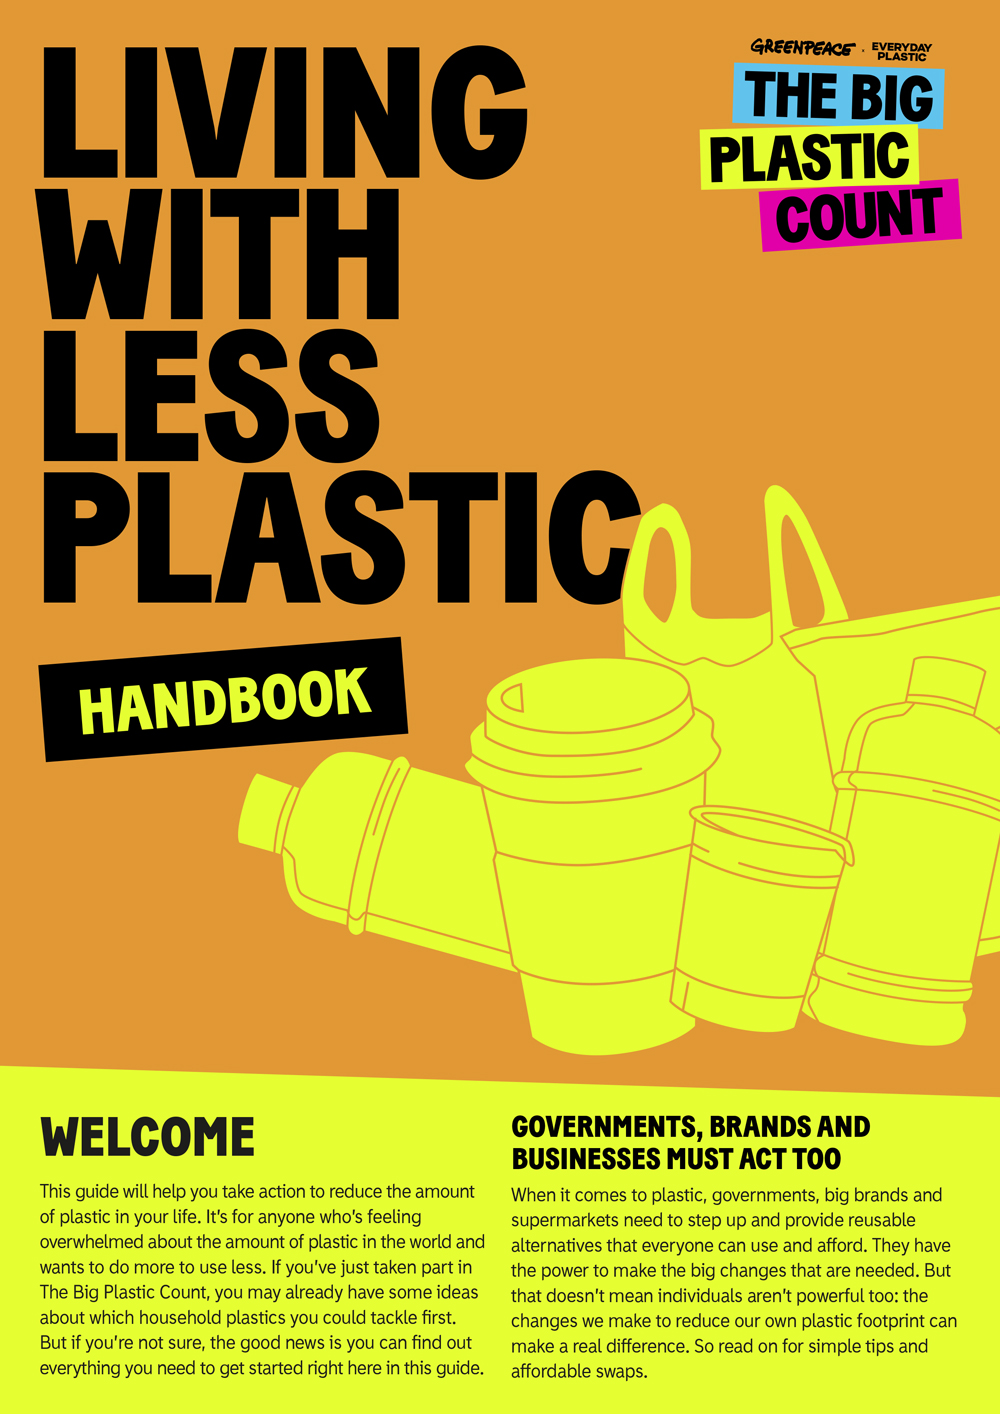 Orange and yellow text with graphic of plastic bags